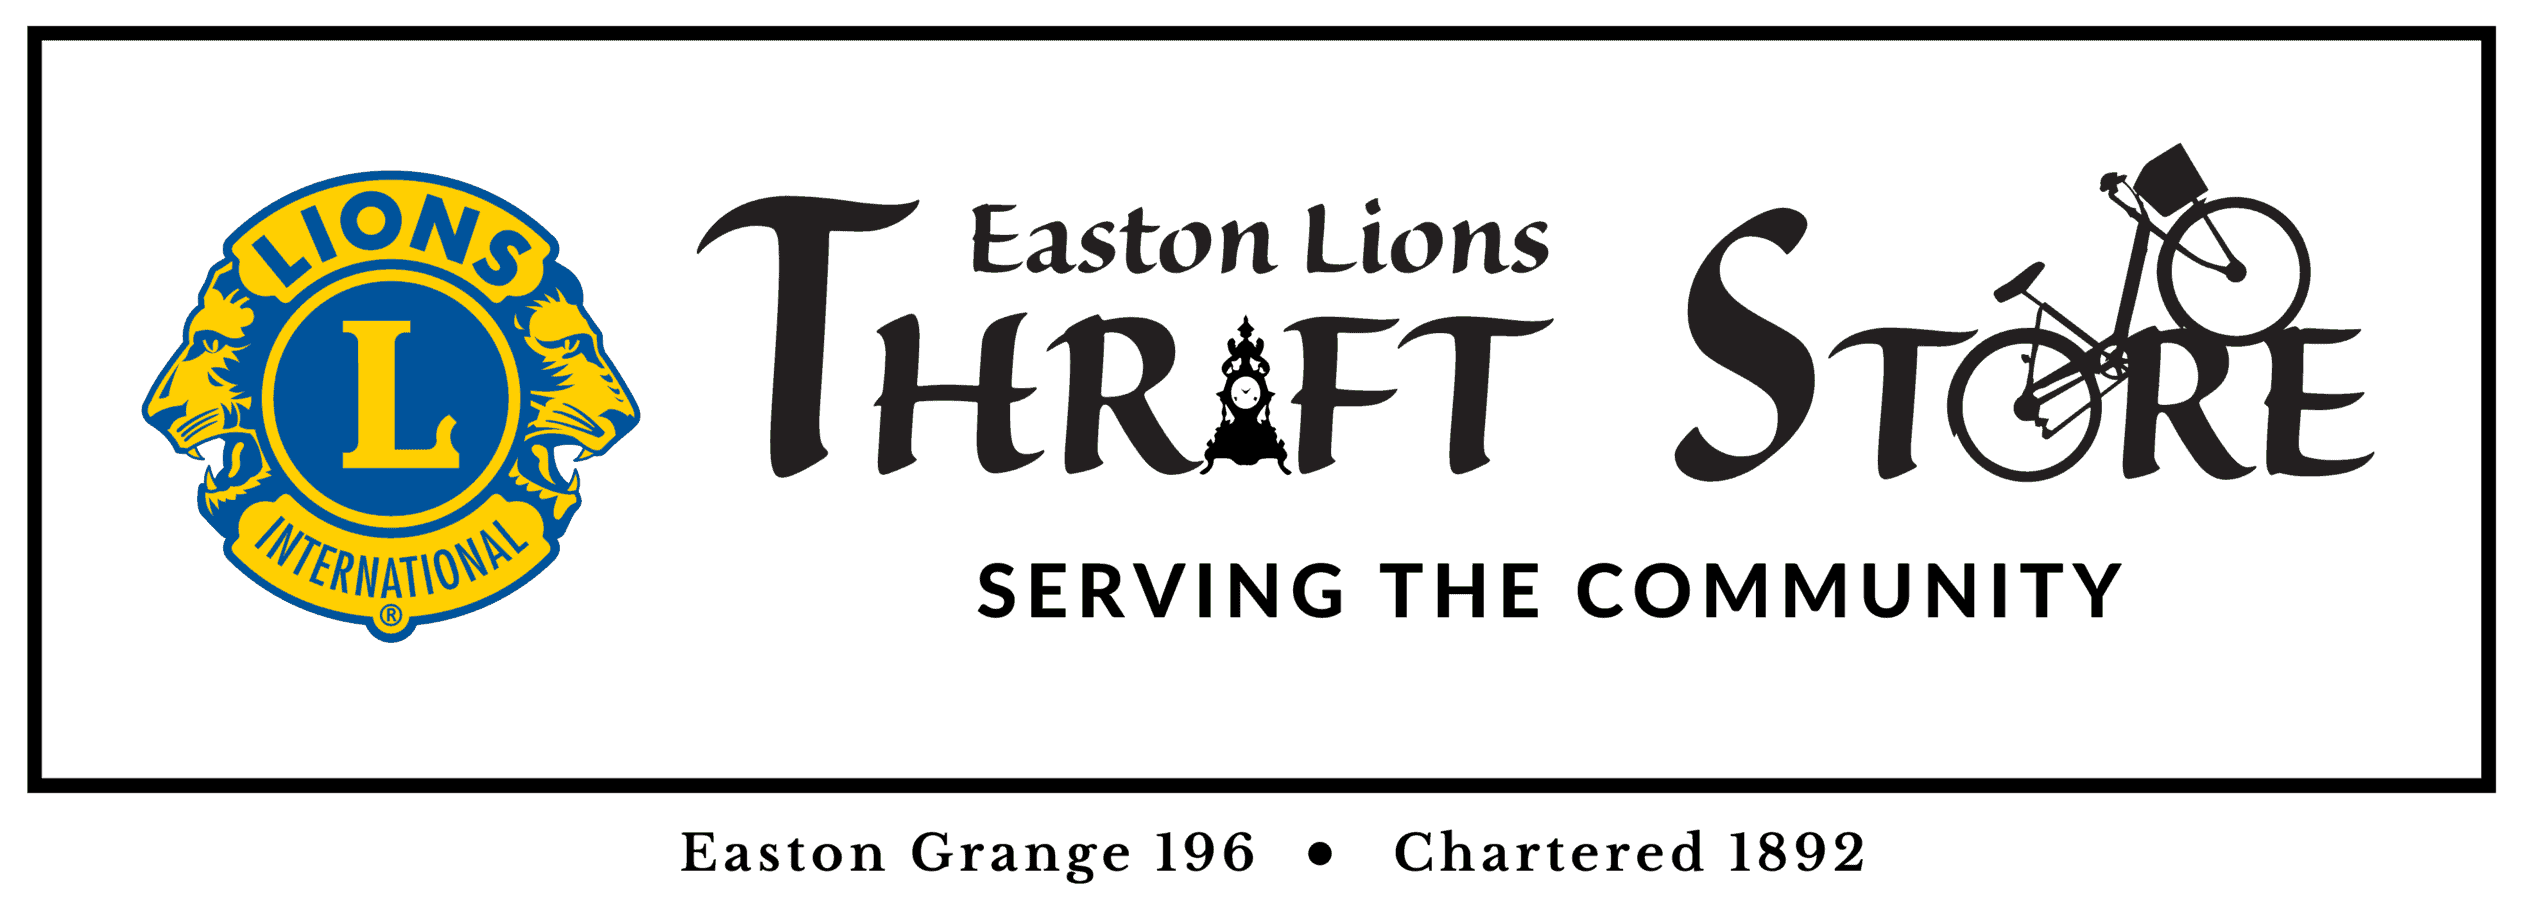 Easton Lions Trhifts Store sign with Easton Grange #196 Chartered 1892